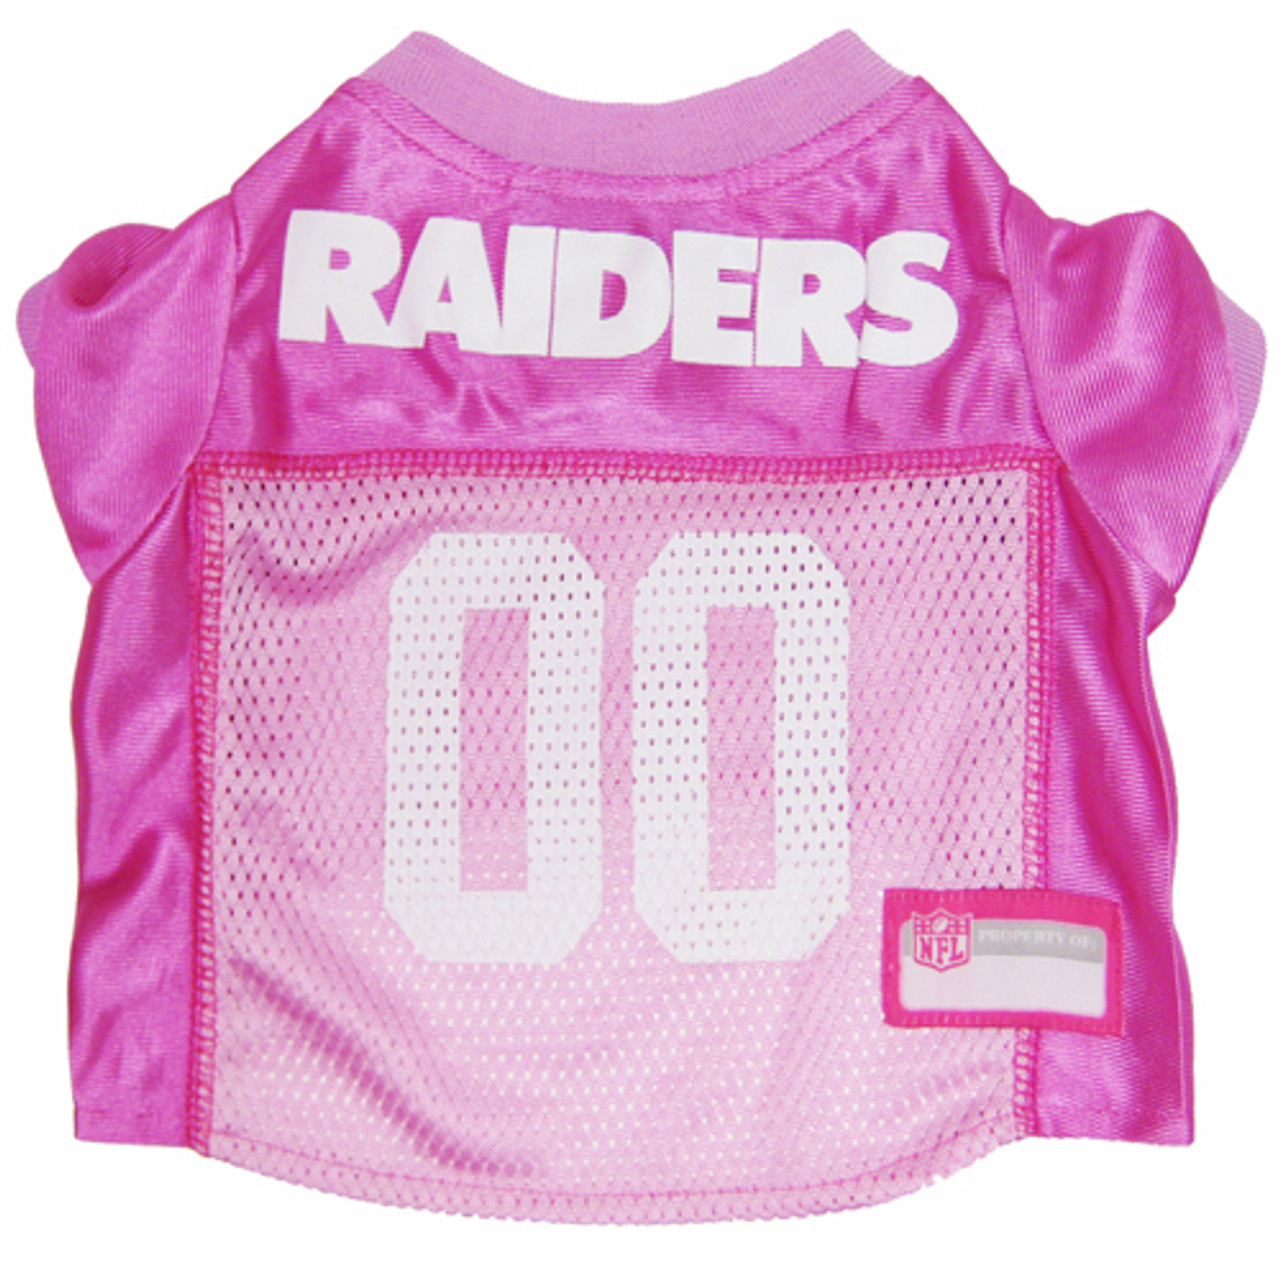 raiders game day jersey